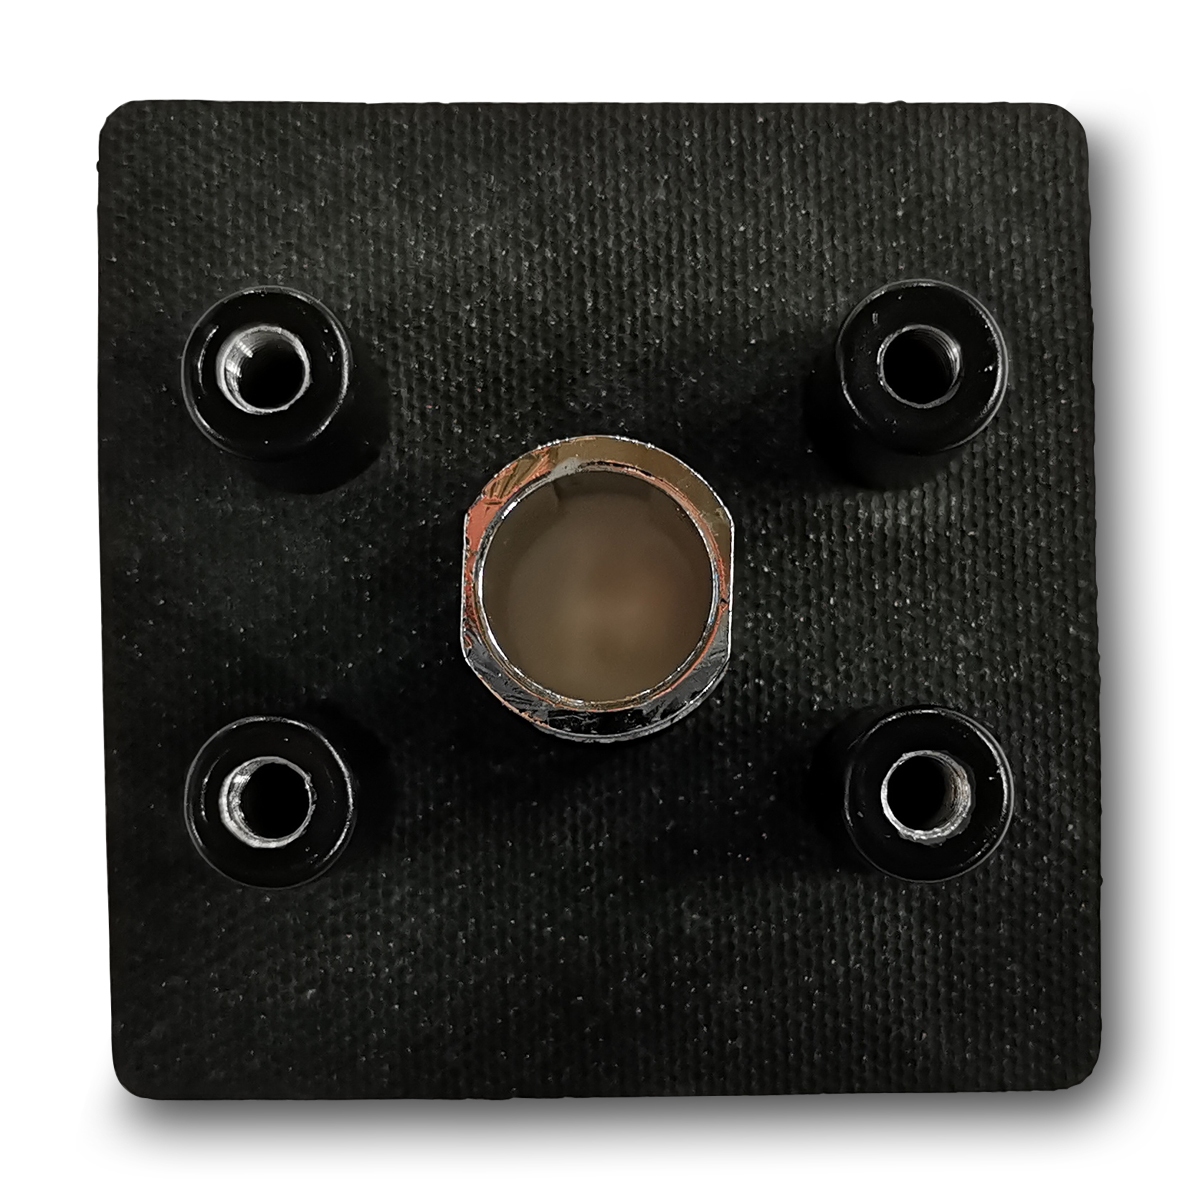 lock plate, 1958, outer plate black, generation 2